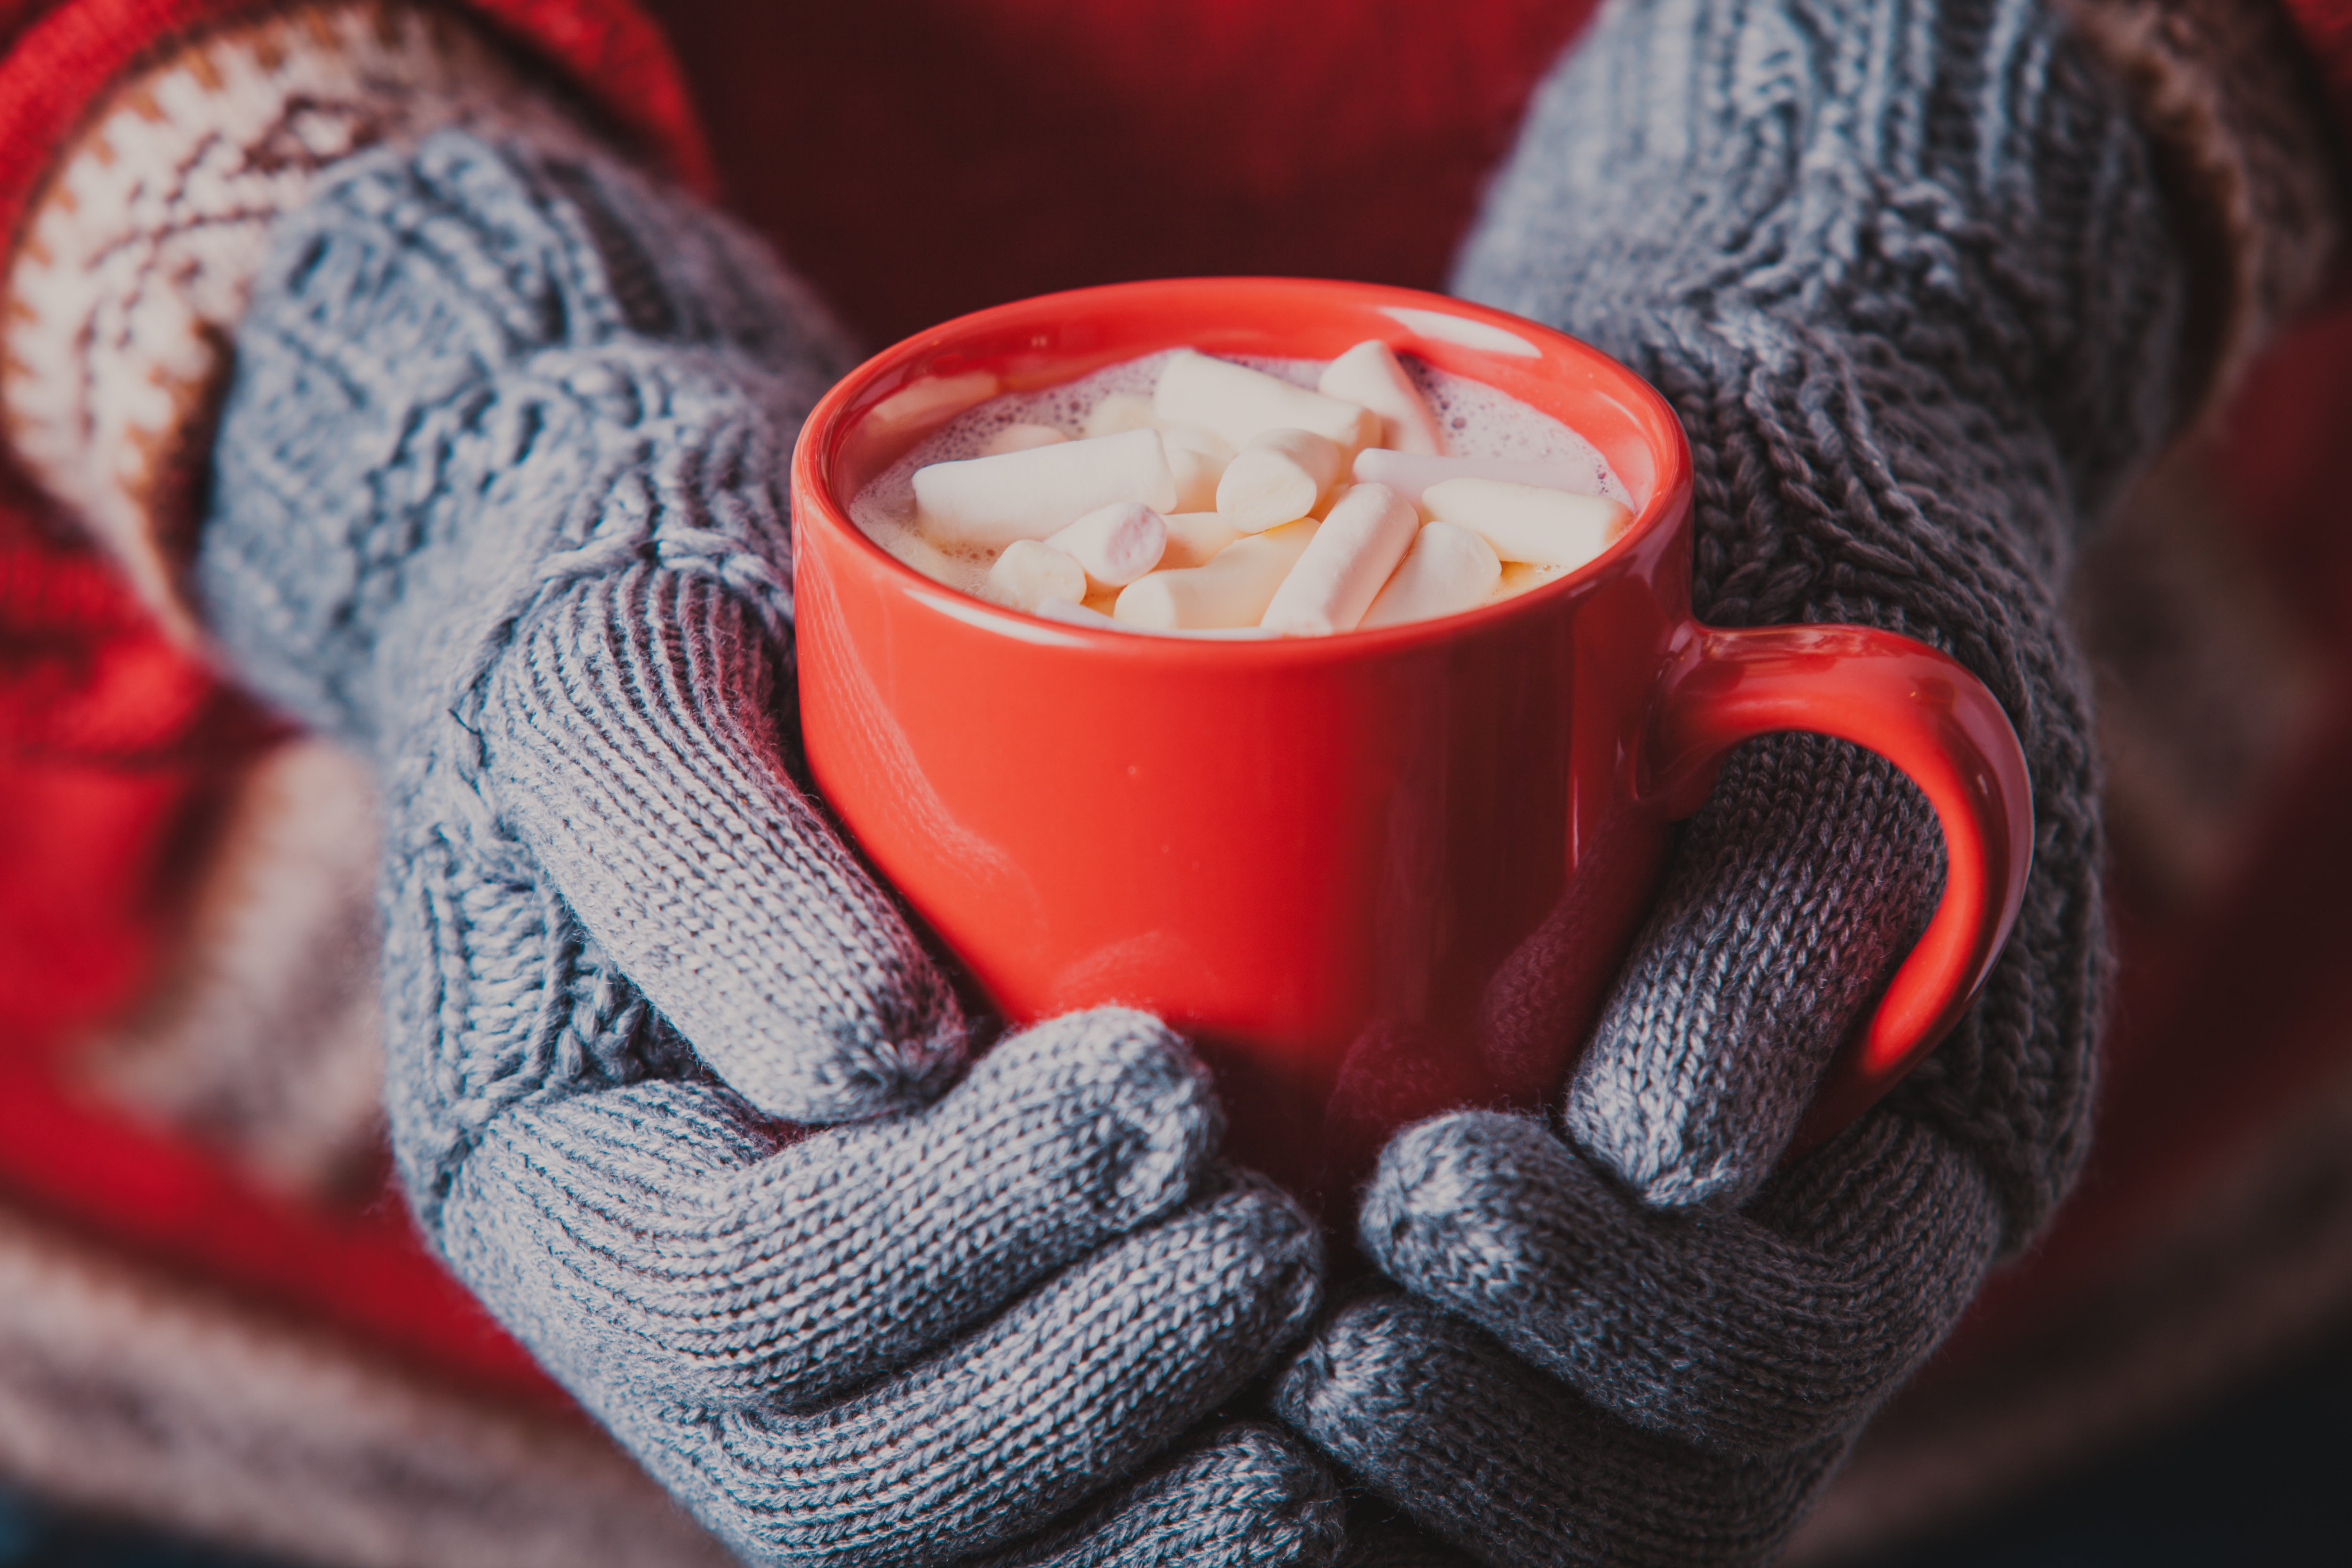 Close-up holiday photo of warm, fuzzy gloves holding a mug of hot chocolate